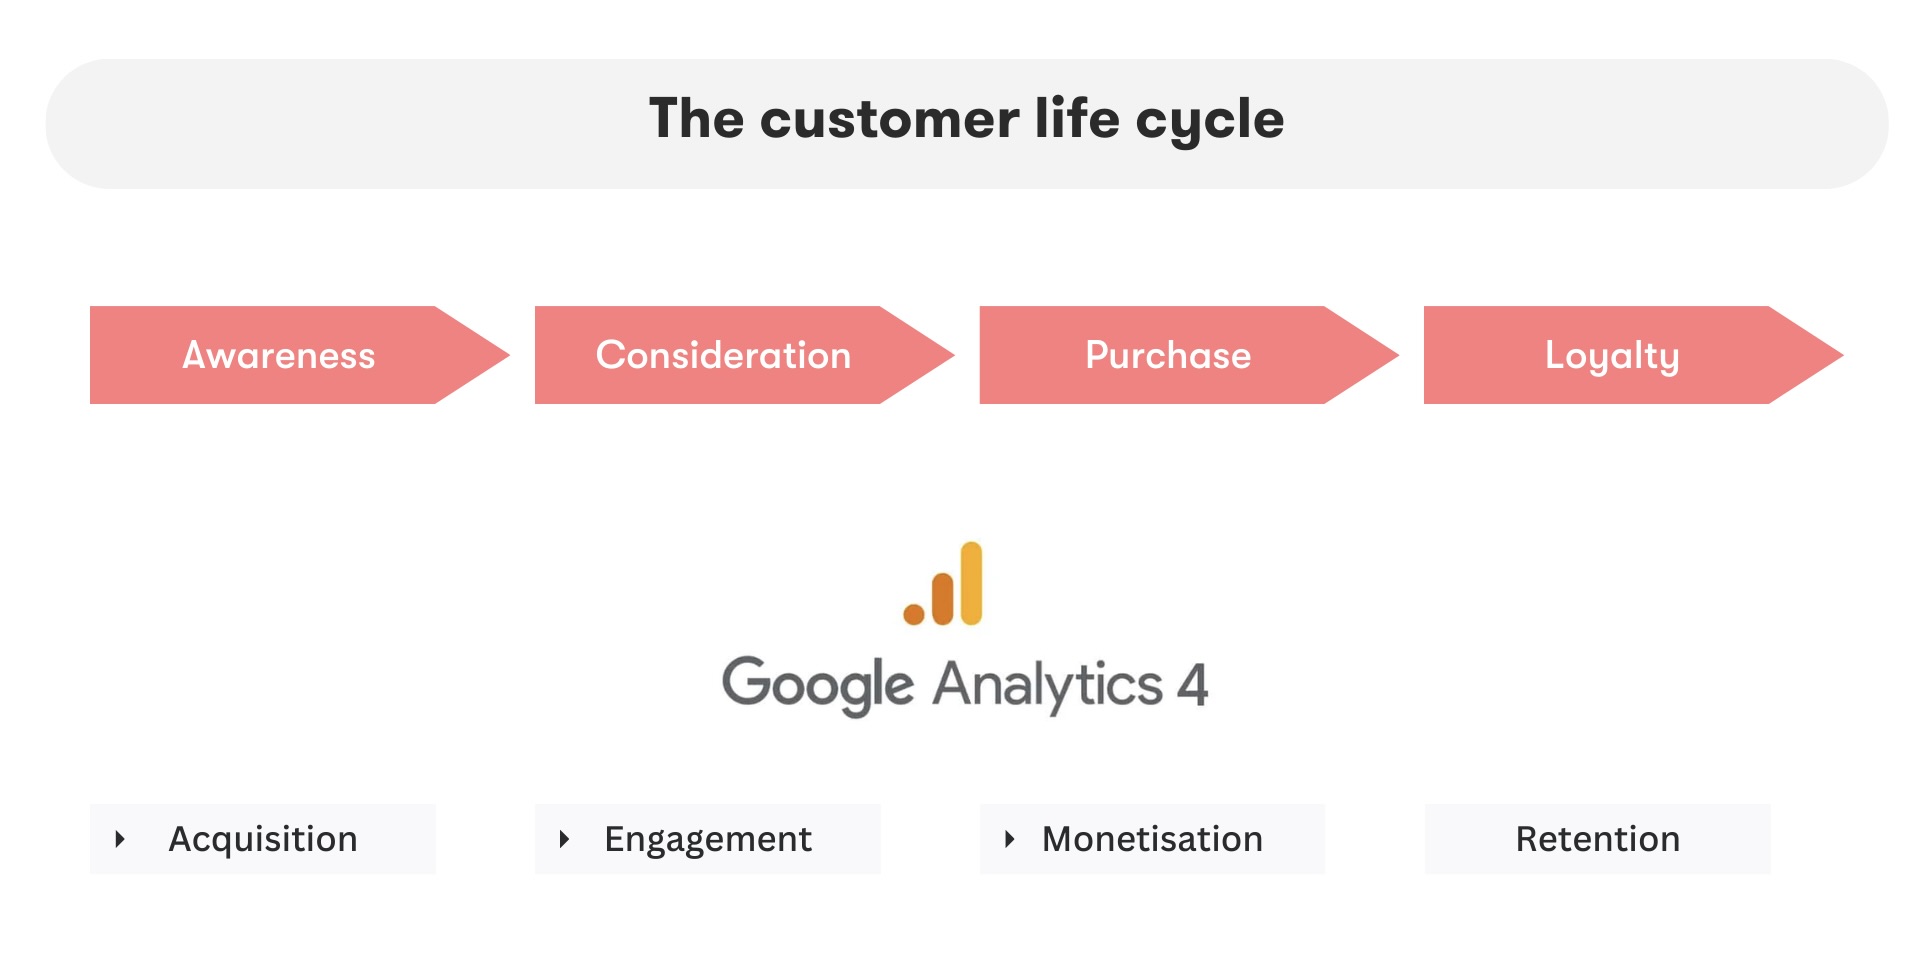 The image shows the four categories of the GA4 Lifecycle Report, which correspond to the phases of the classic customer lifecycle. 